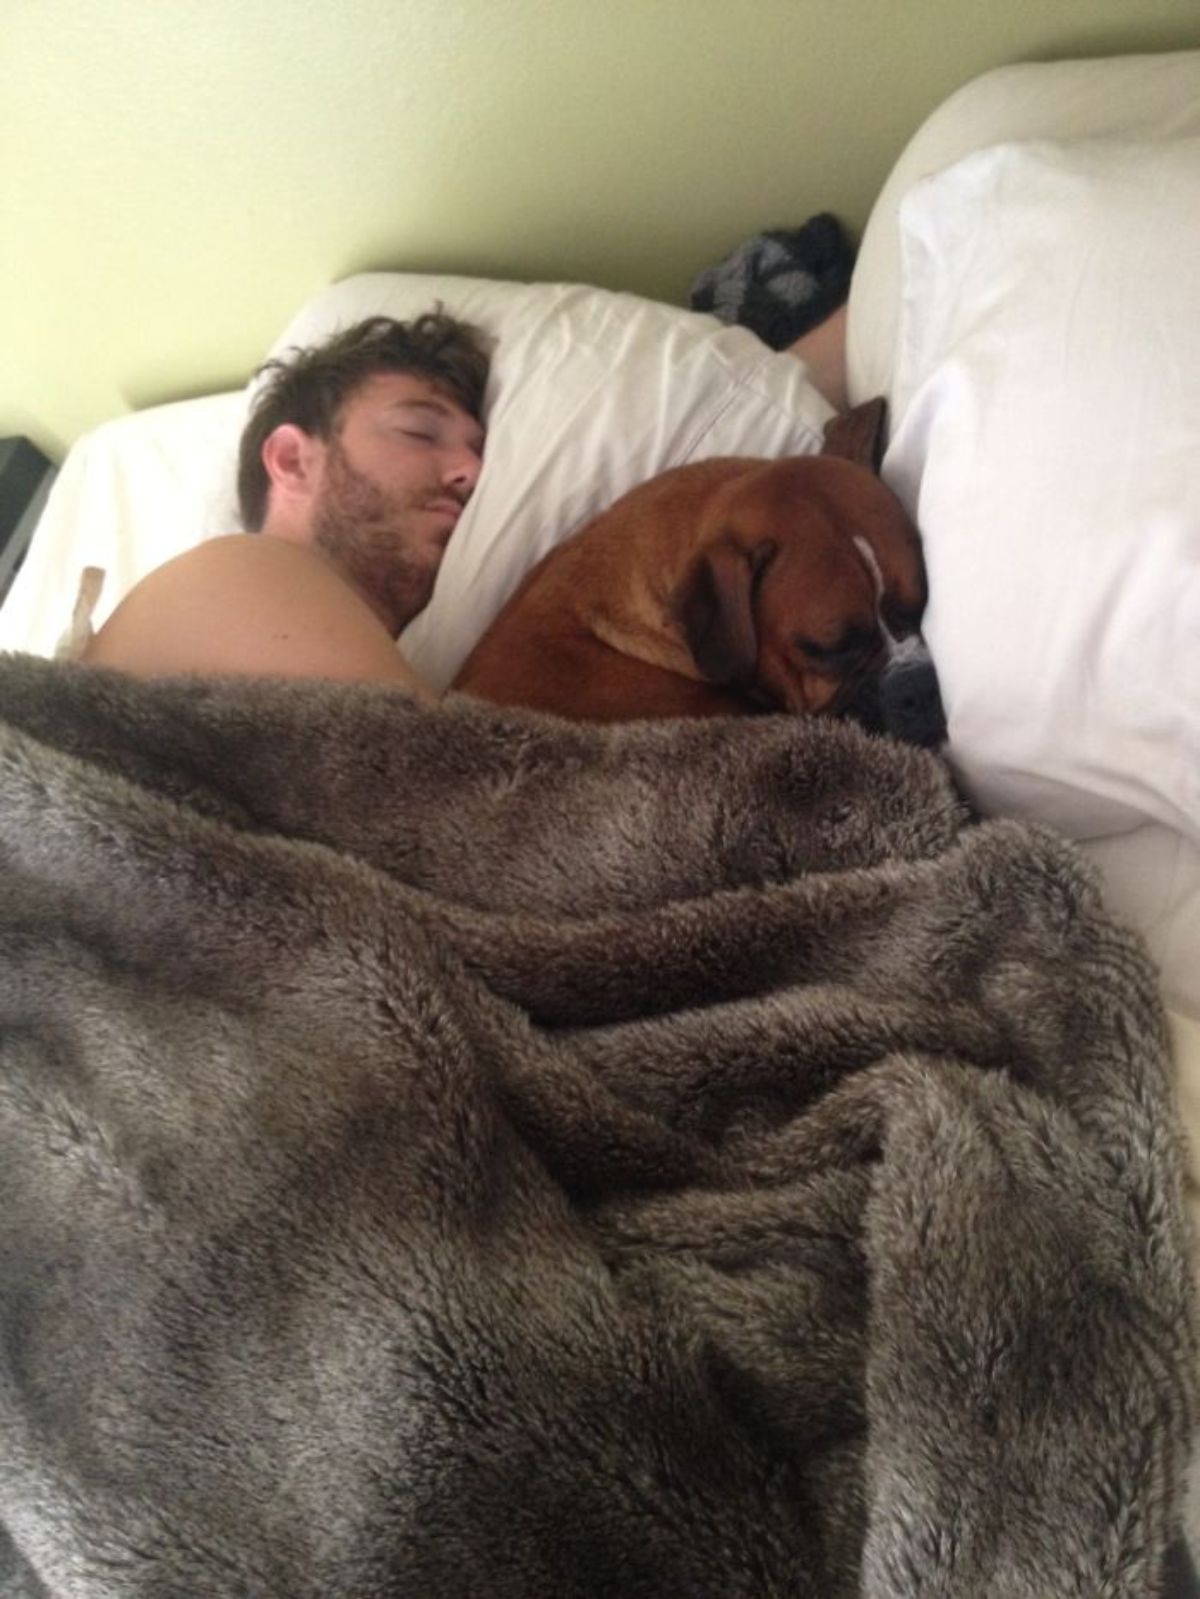 brown and white boxer sleeping on a bed cuddling with a man under a brown fuzzy blanket